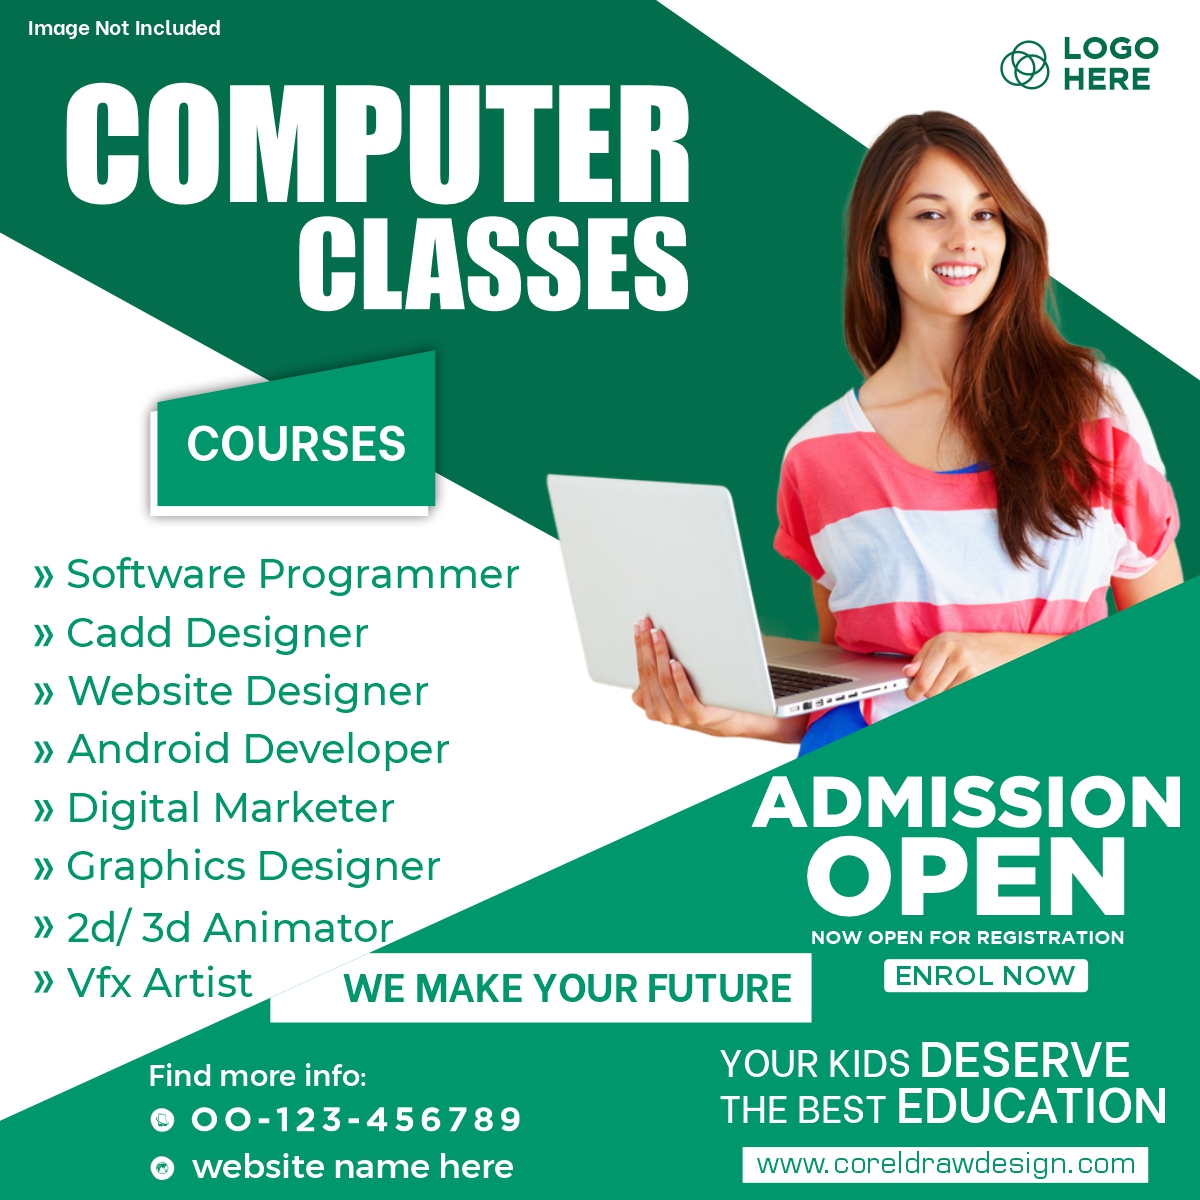 Preview Computer Classes Admission Social Media Post Template Free Vector 1603891669 